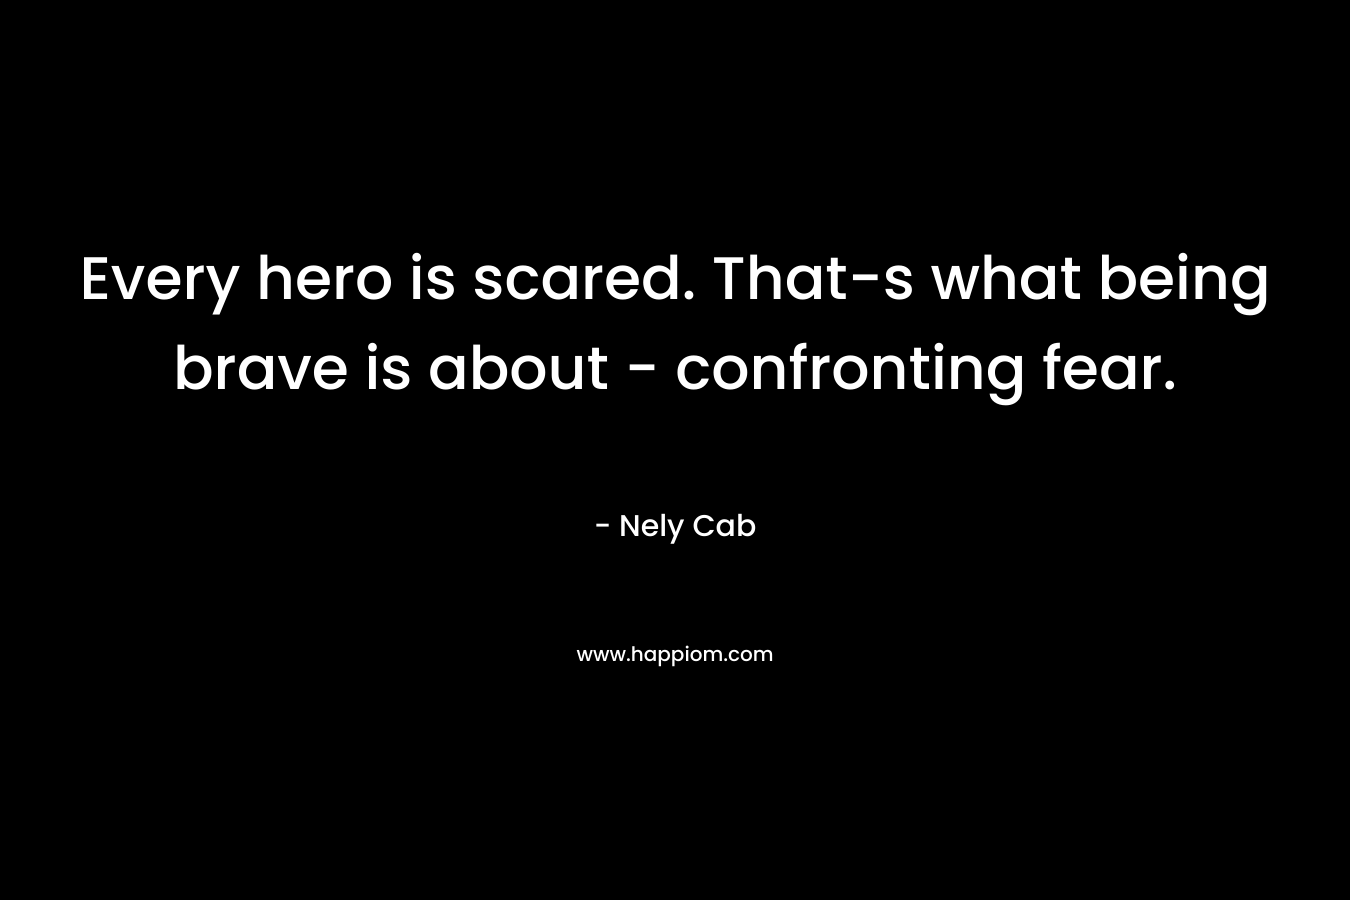 Every hero is scared. That-s what being brave is about - confronting fear.